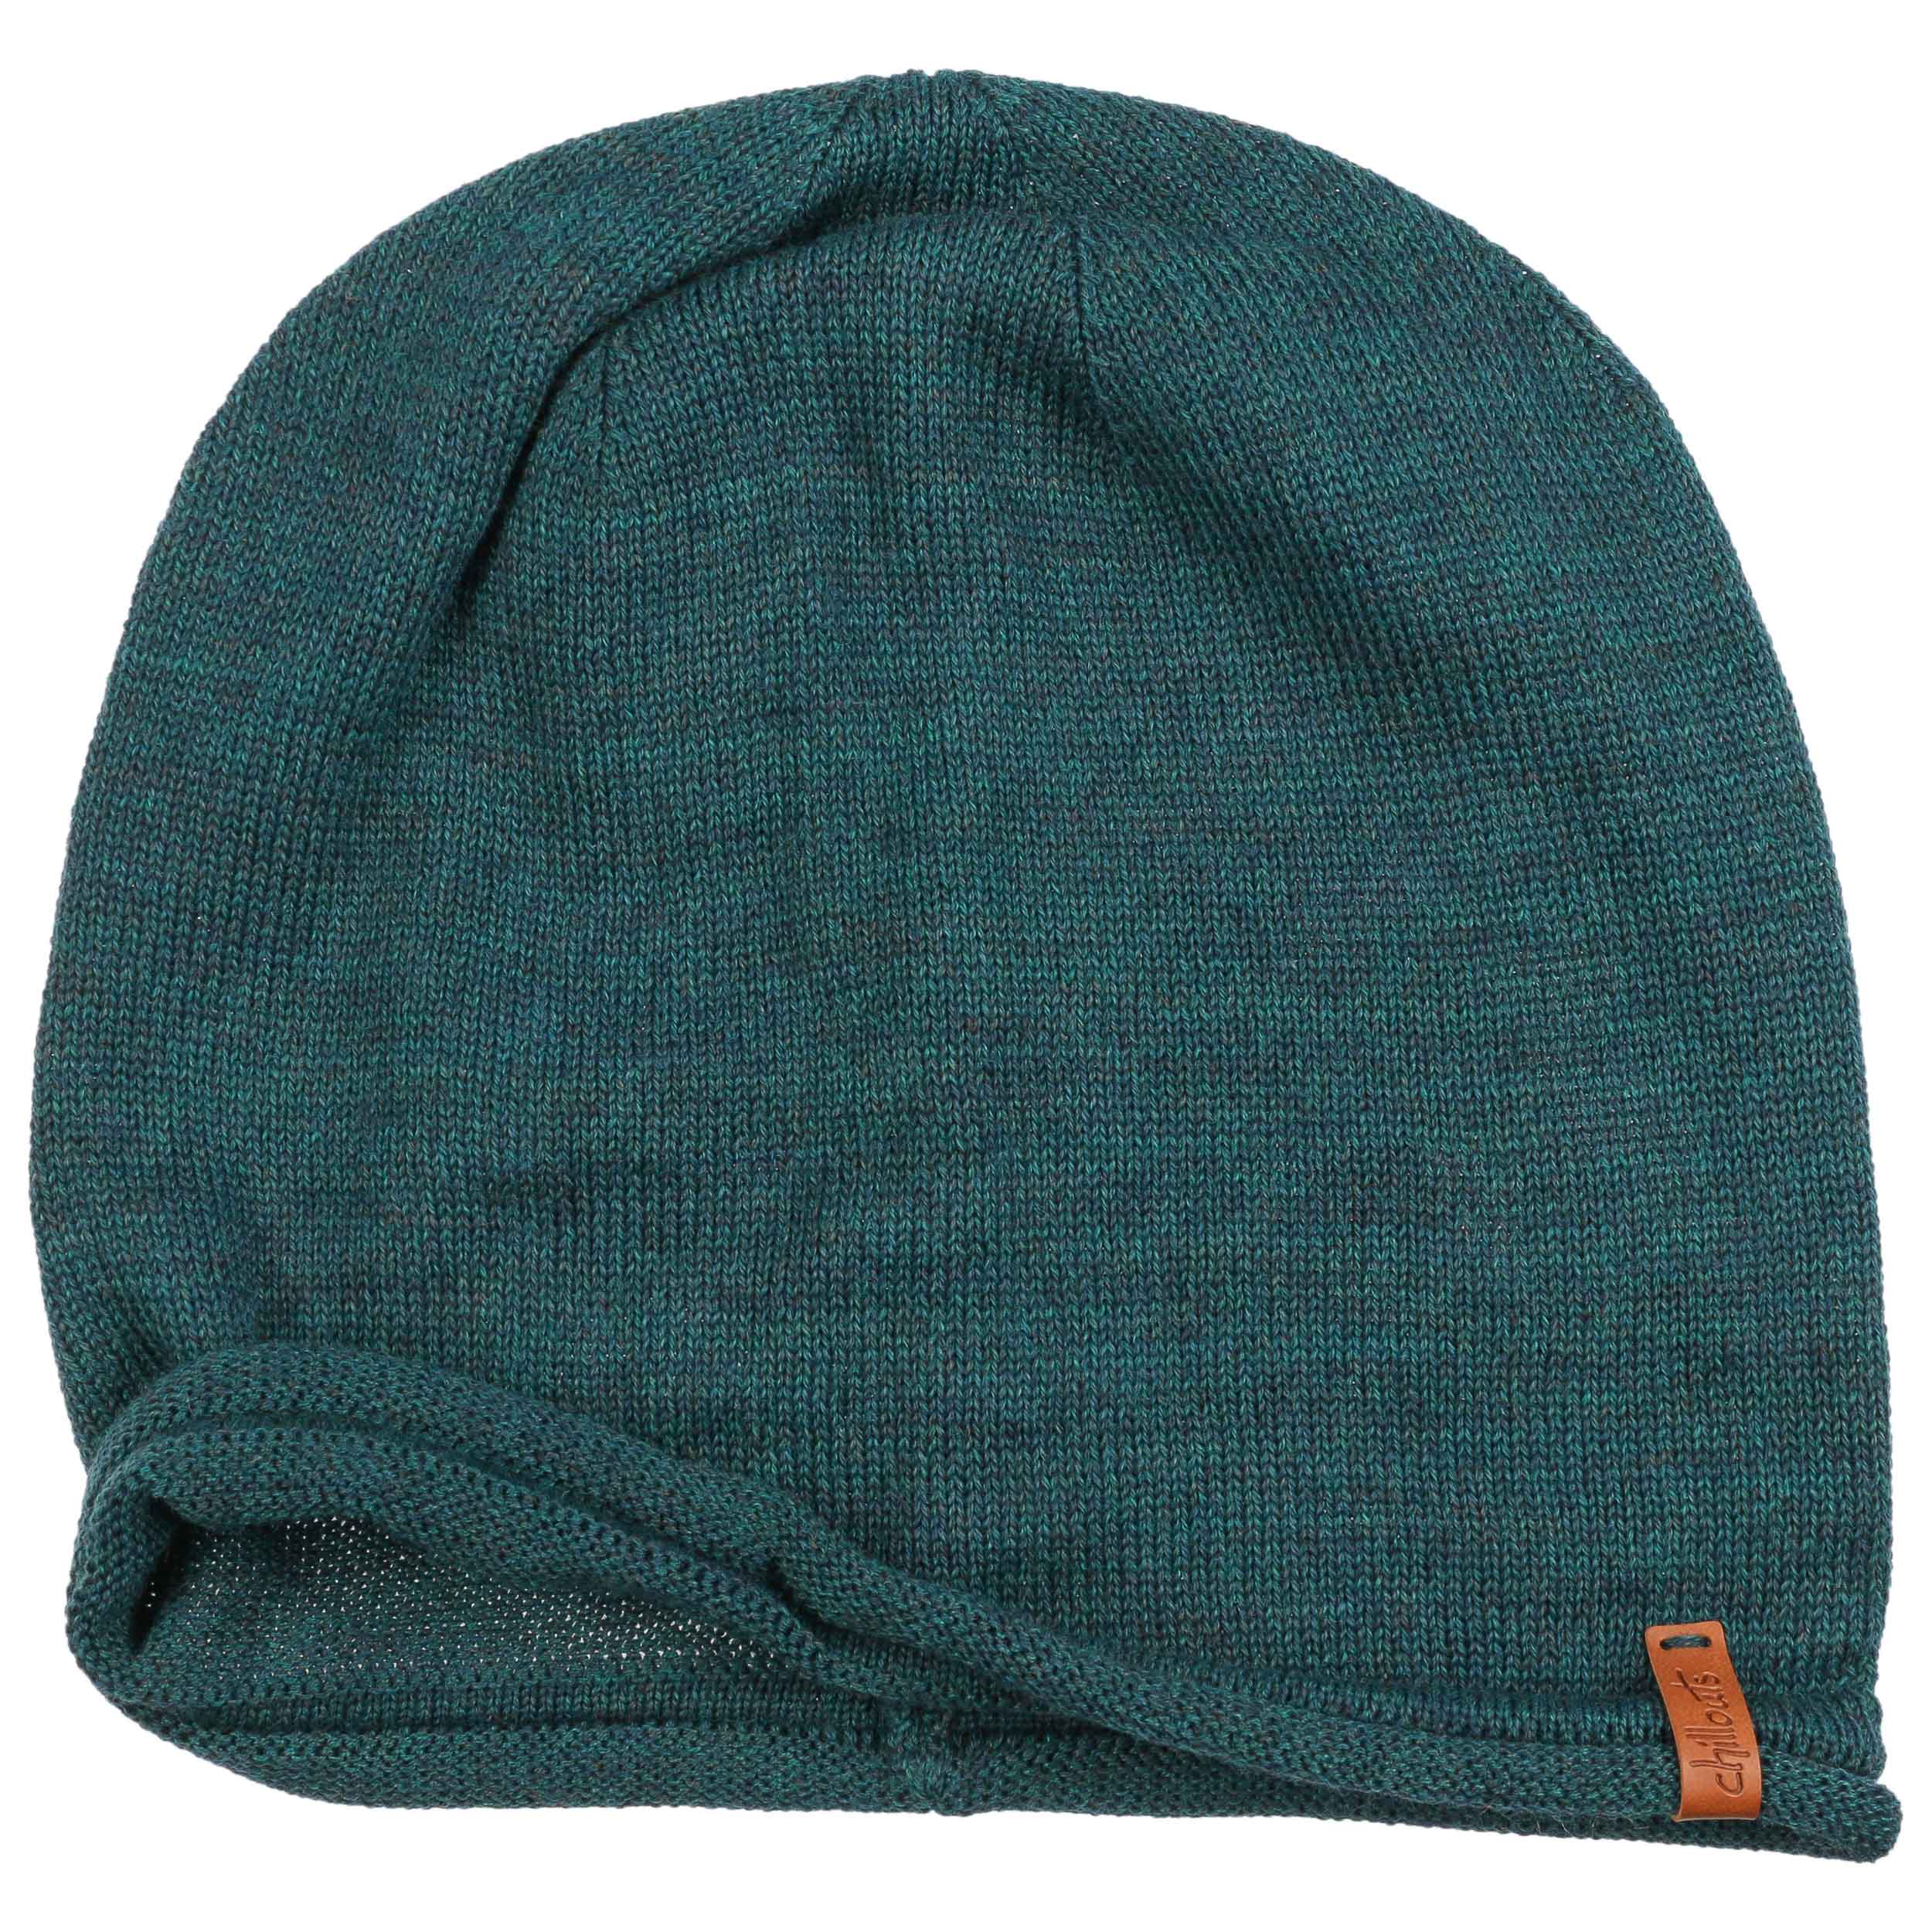 Leicester Oversize 29,95 by € - Chillouts Beanie